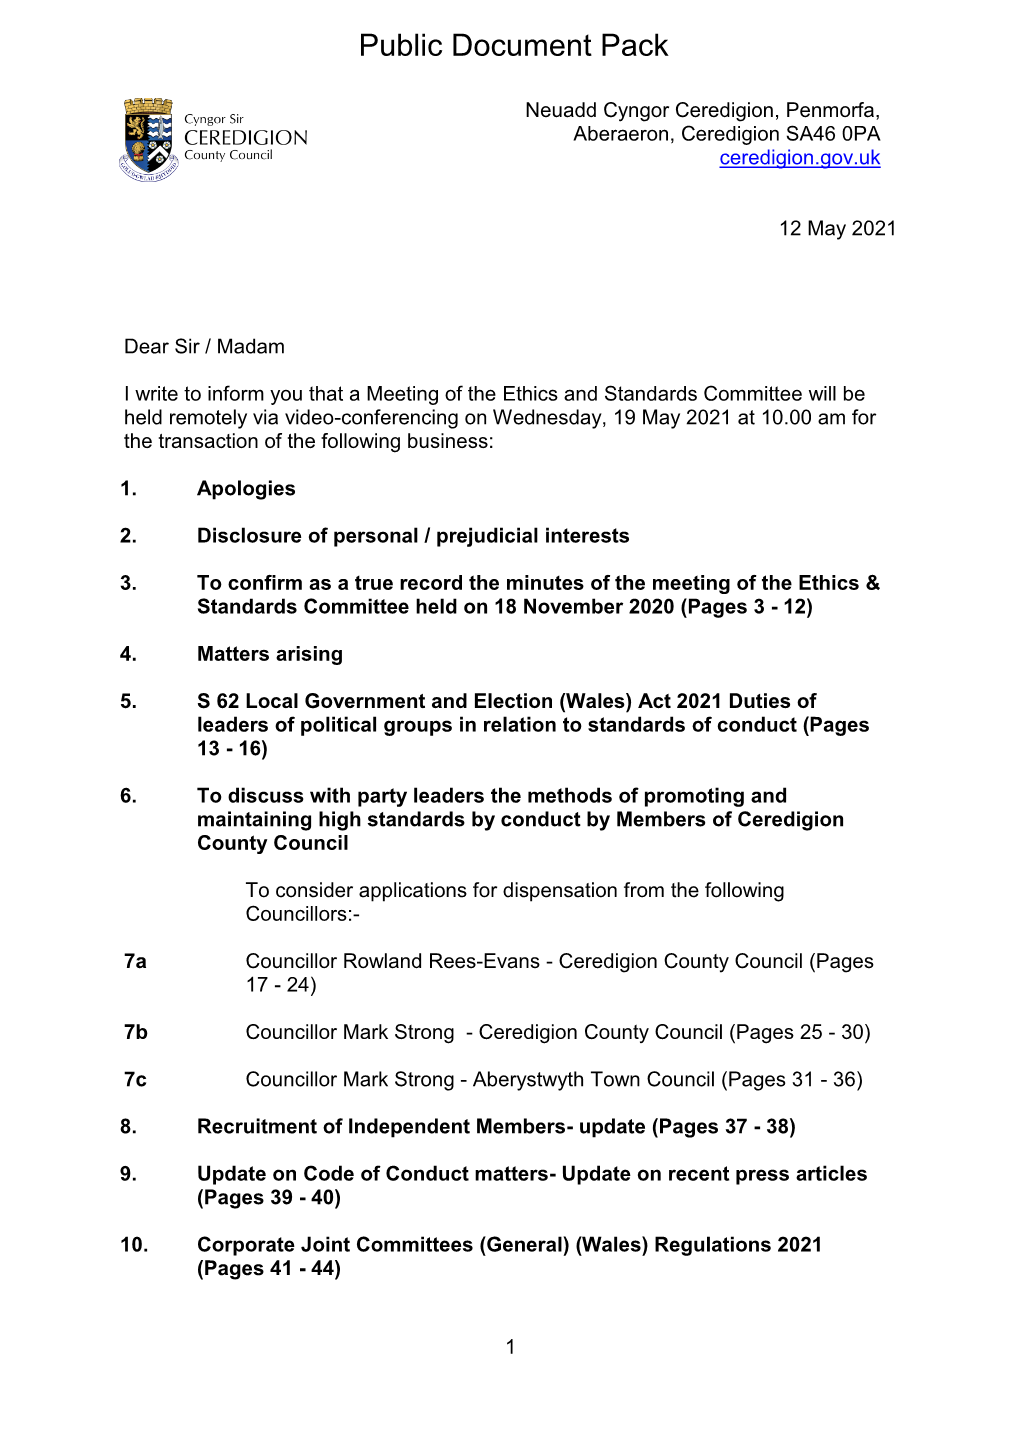 (Public Pack)Agenda Document for Ethics and Standards Committee